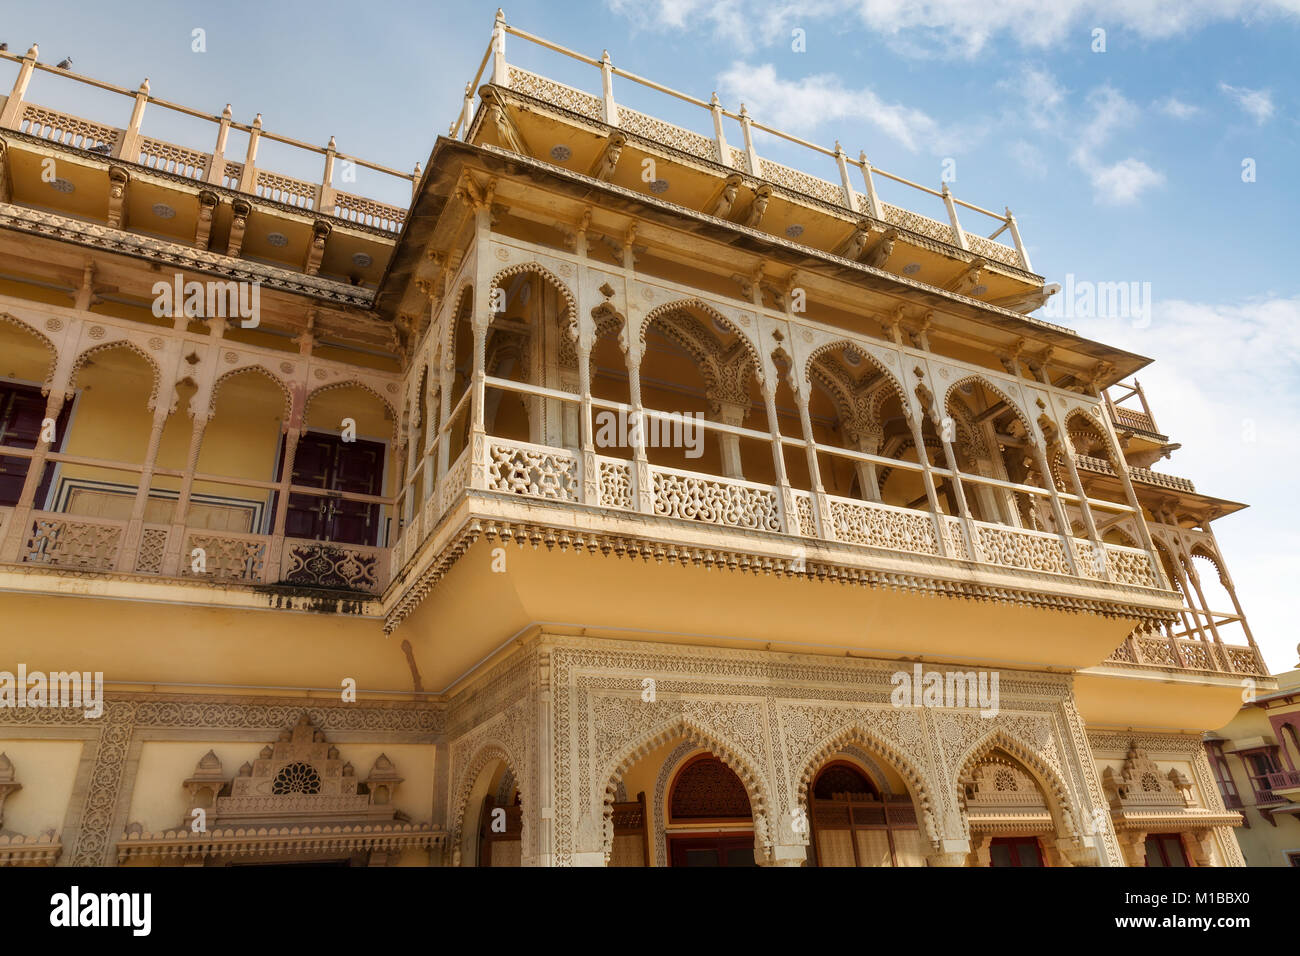 City Palace Jaipur Rajasthan - uno storico palazzo reale museo noto come Mubarak Mahal nel complesso del City Palace Foto Stock